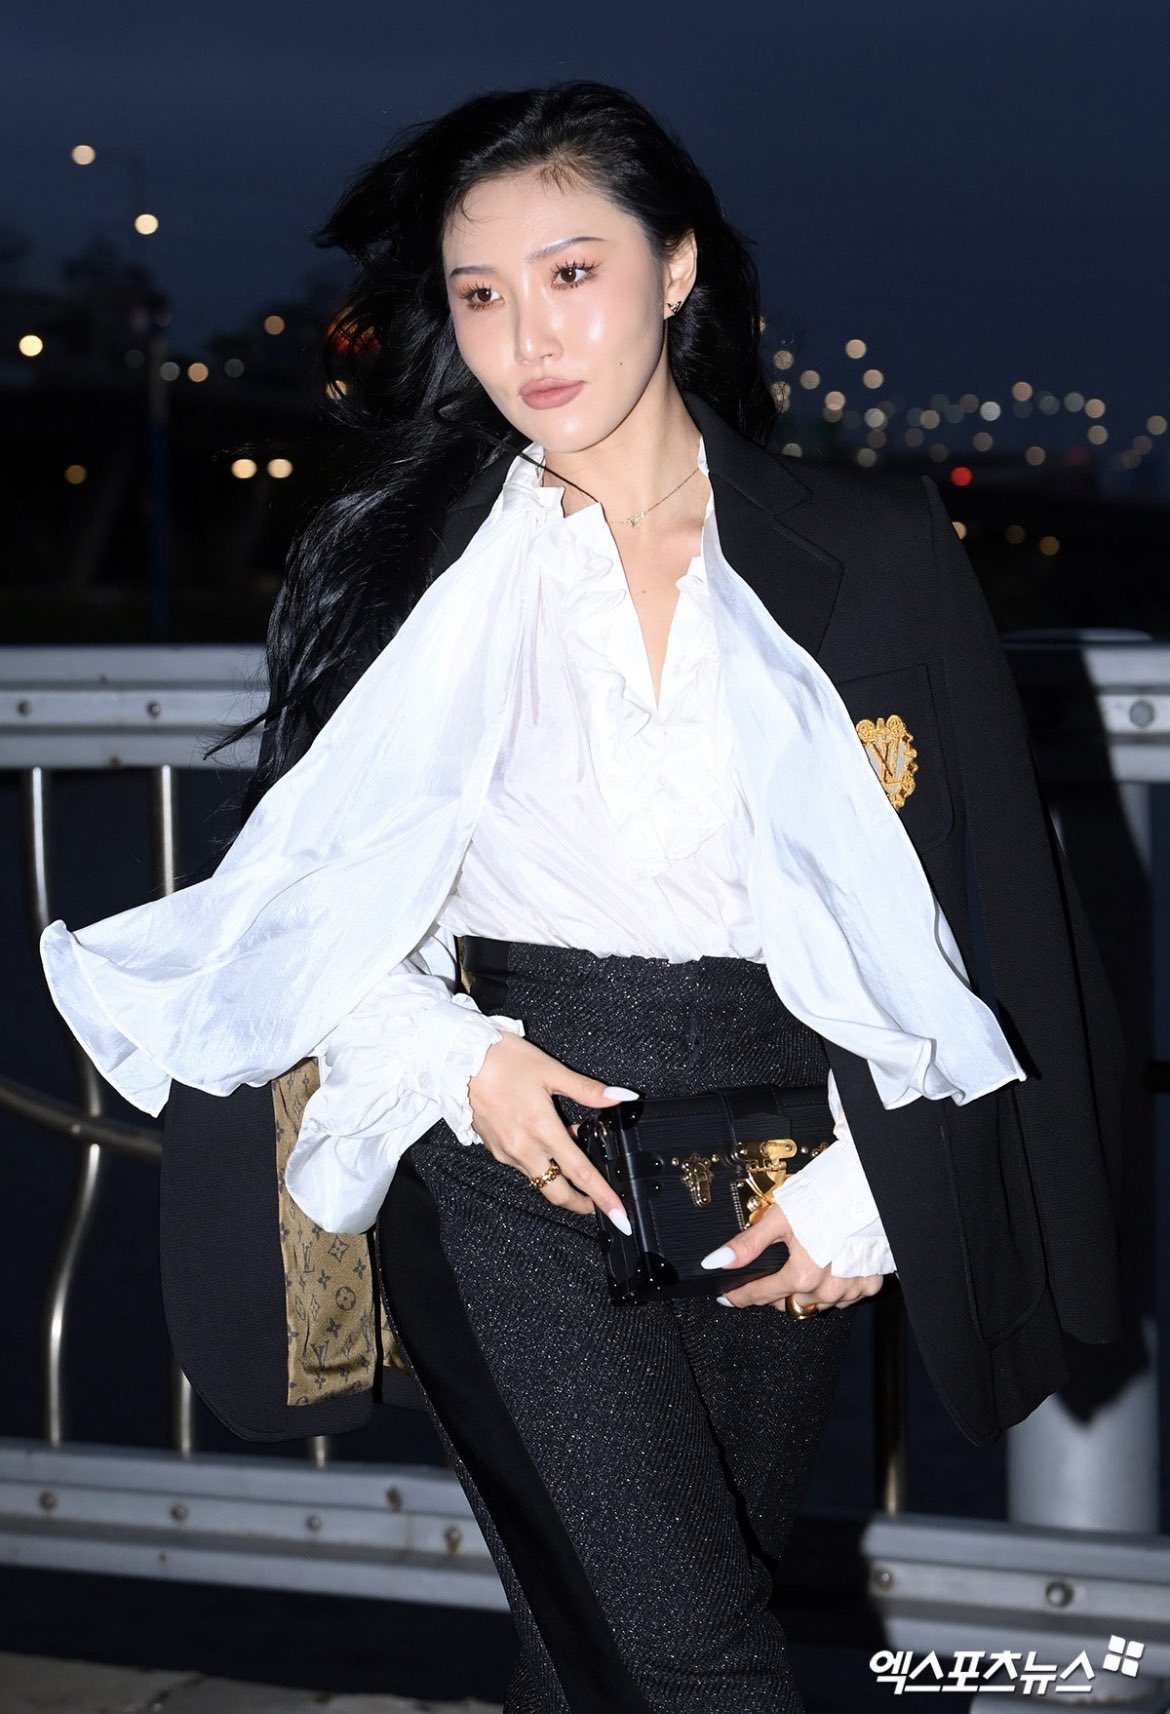 NewJeans's Hyein, Taeyeon, Mingyu and more: Stars at Louis Vuitton's  fashion show in Seoul